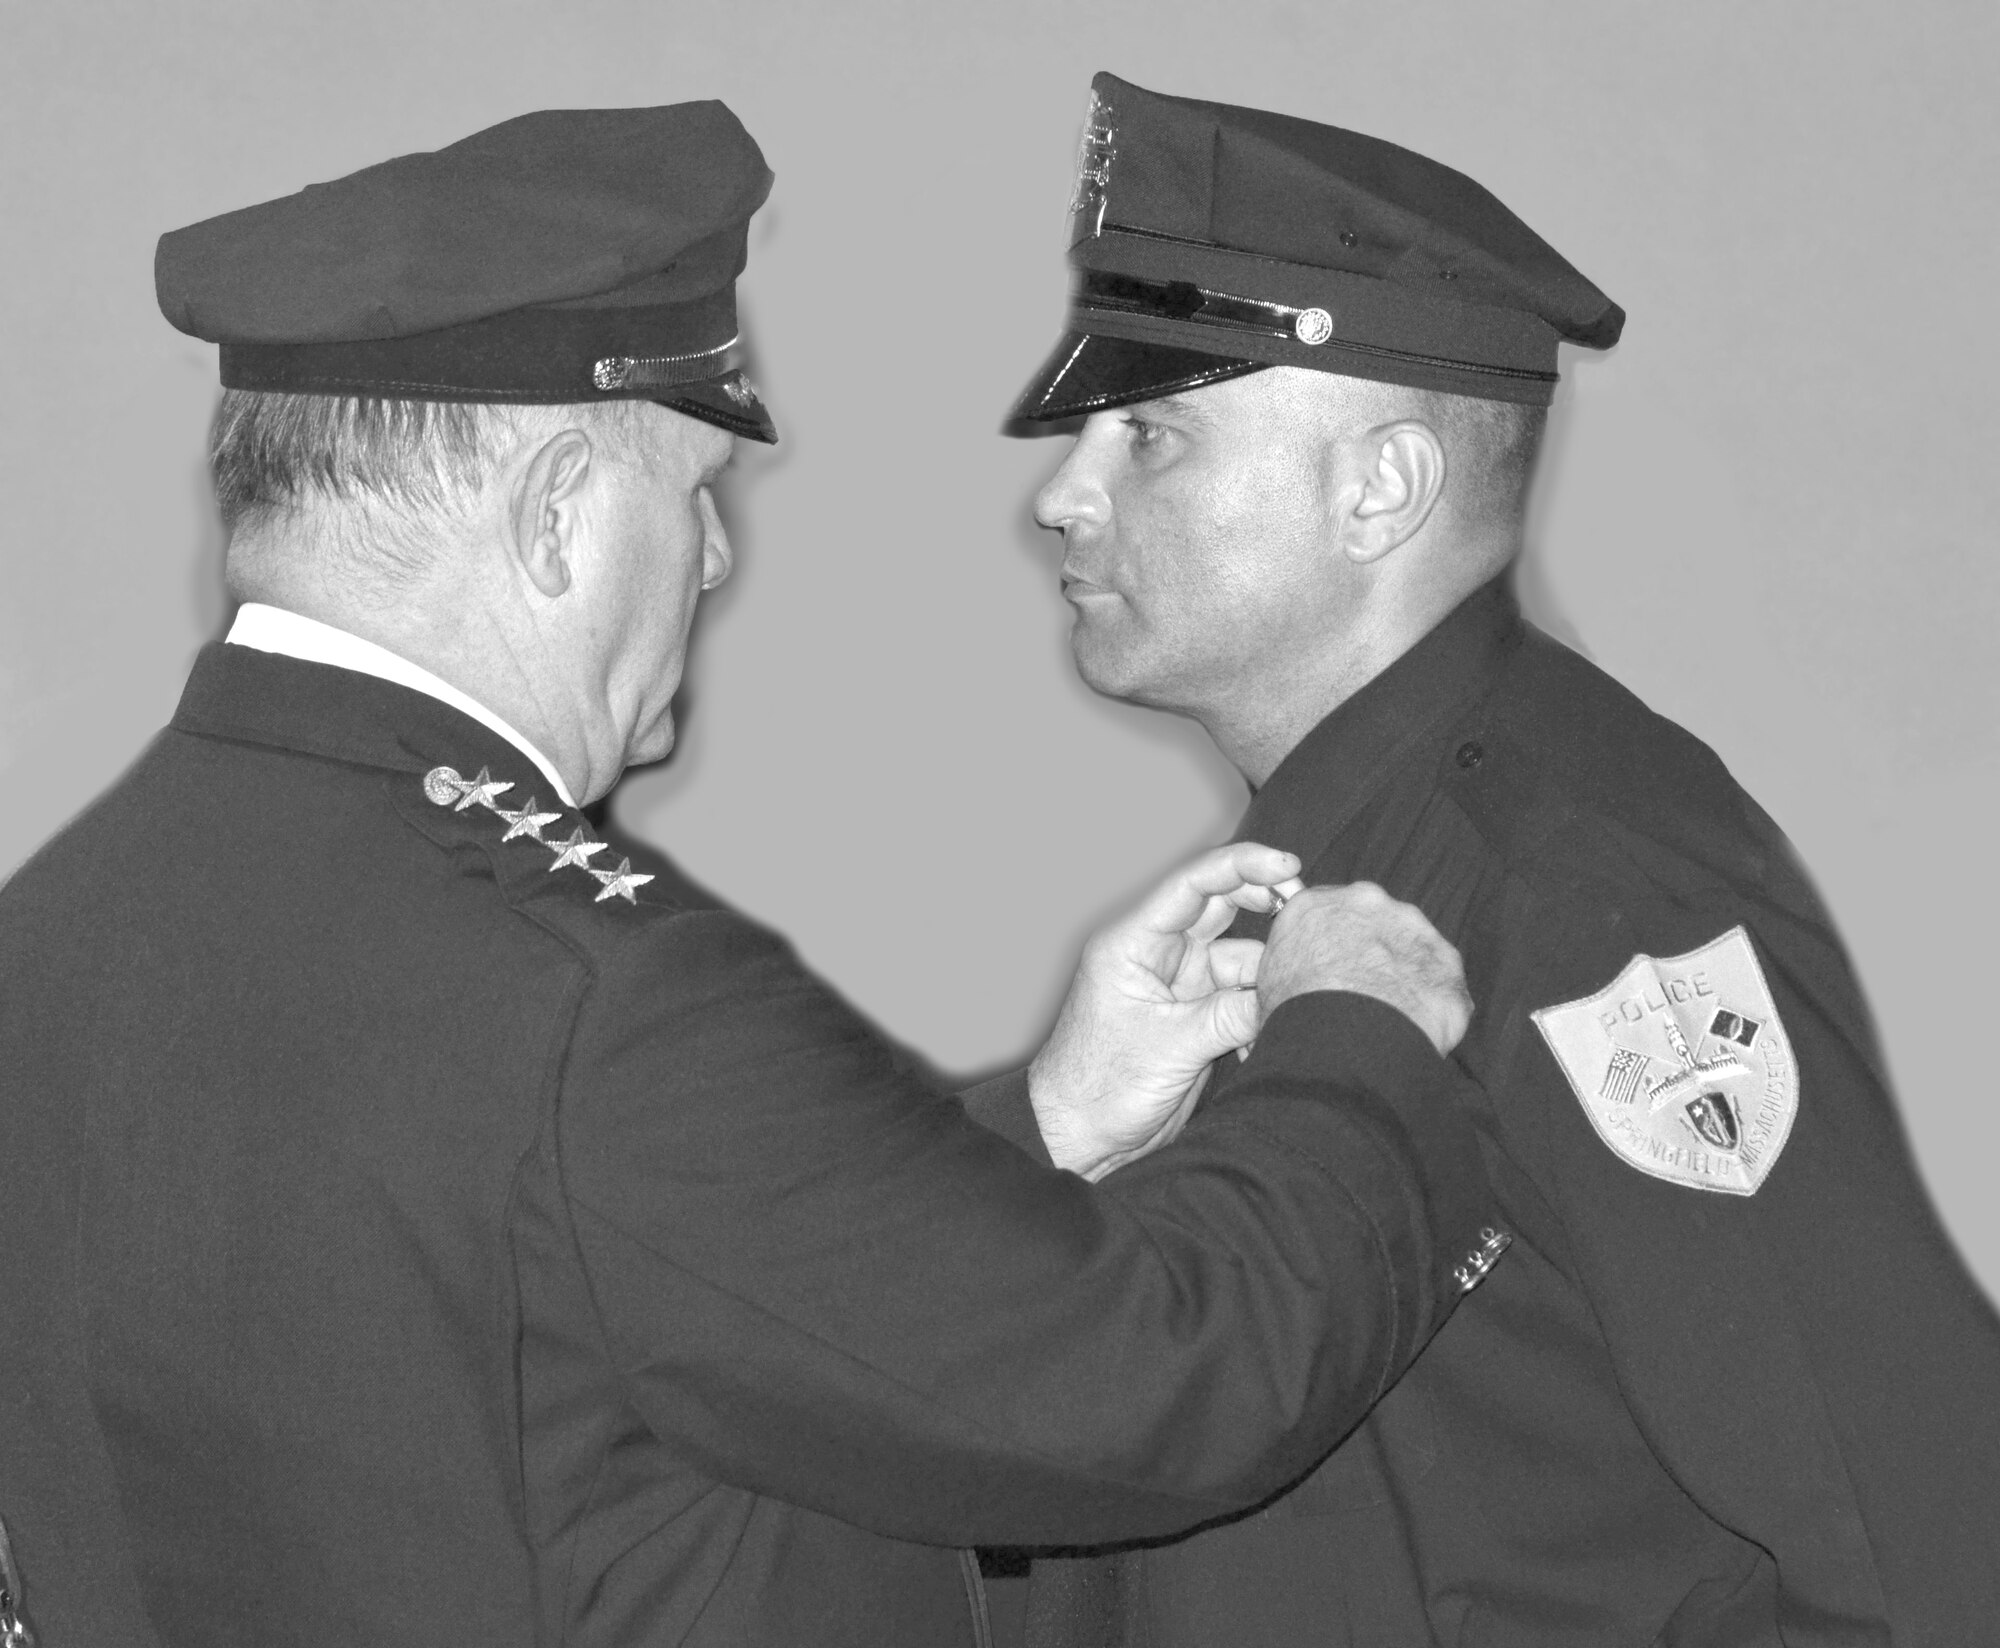 Springfield Police Commissioner William Fitchet pins on MSgt. Arjel Falcon’s badge during the Springfield Police Academy graduation Sept. 5. (U.S. Air Force photo/SSgt. Kelly Galloway)